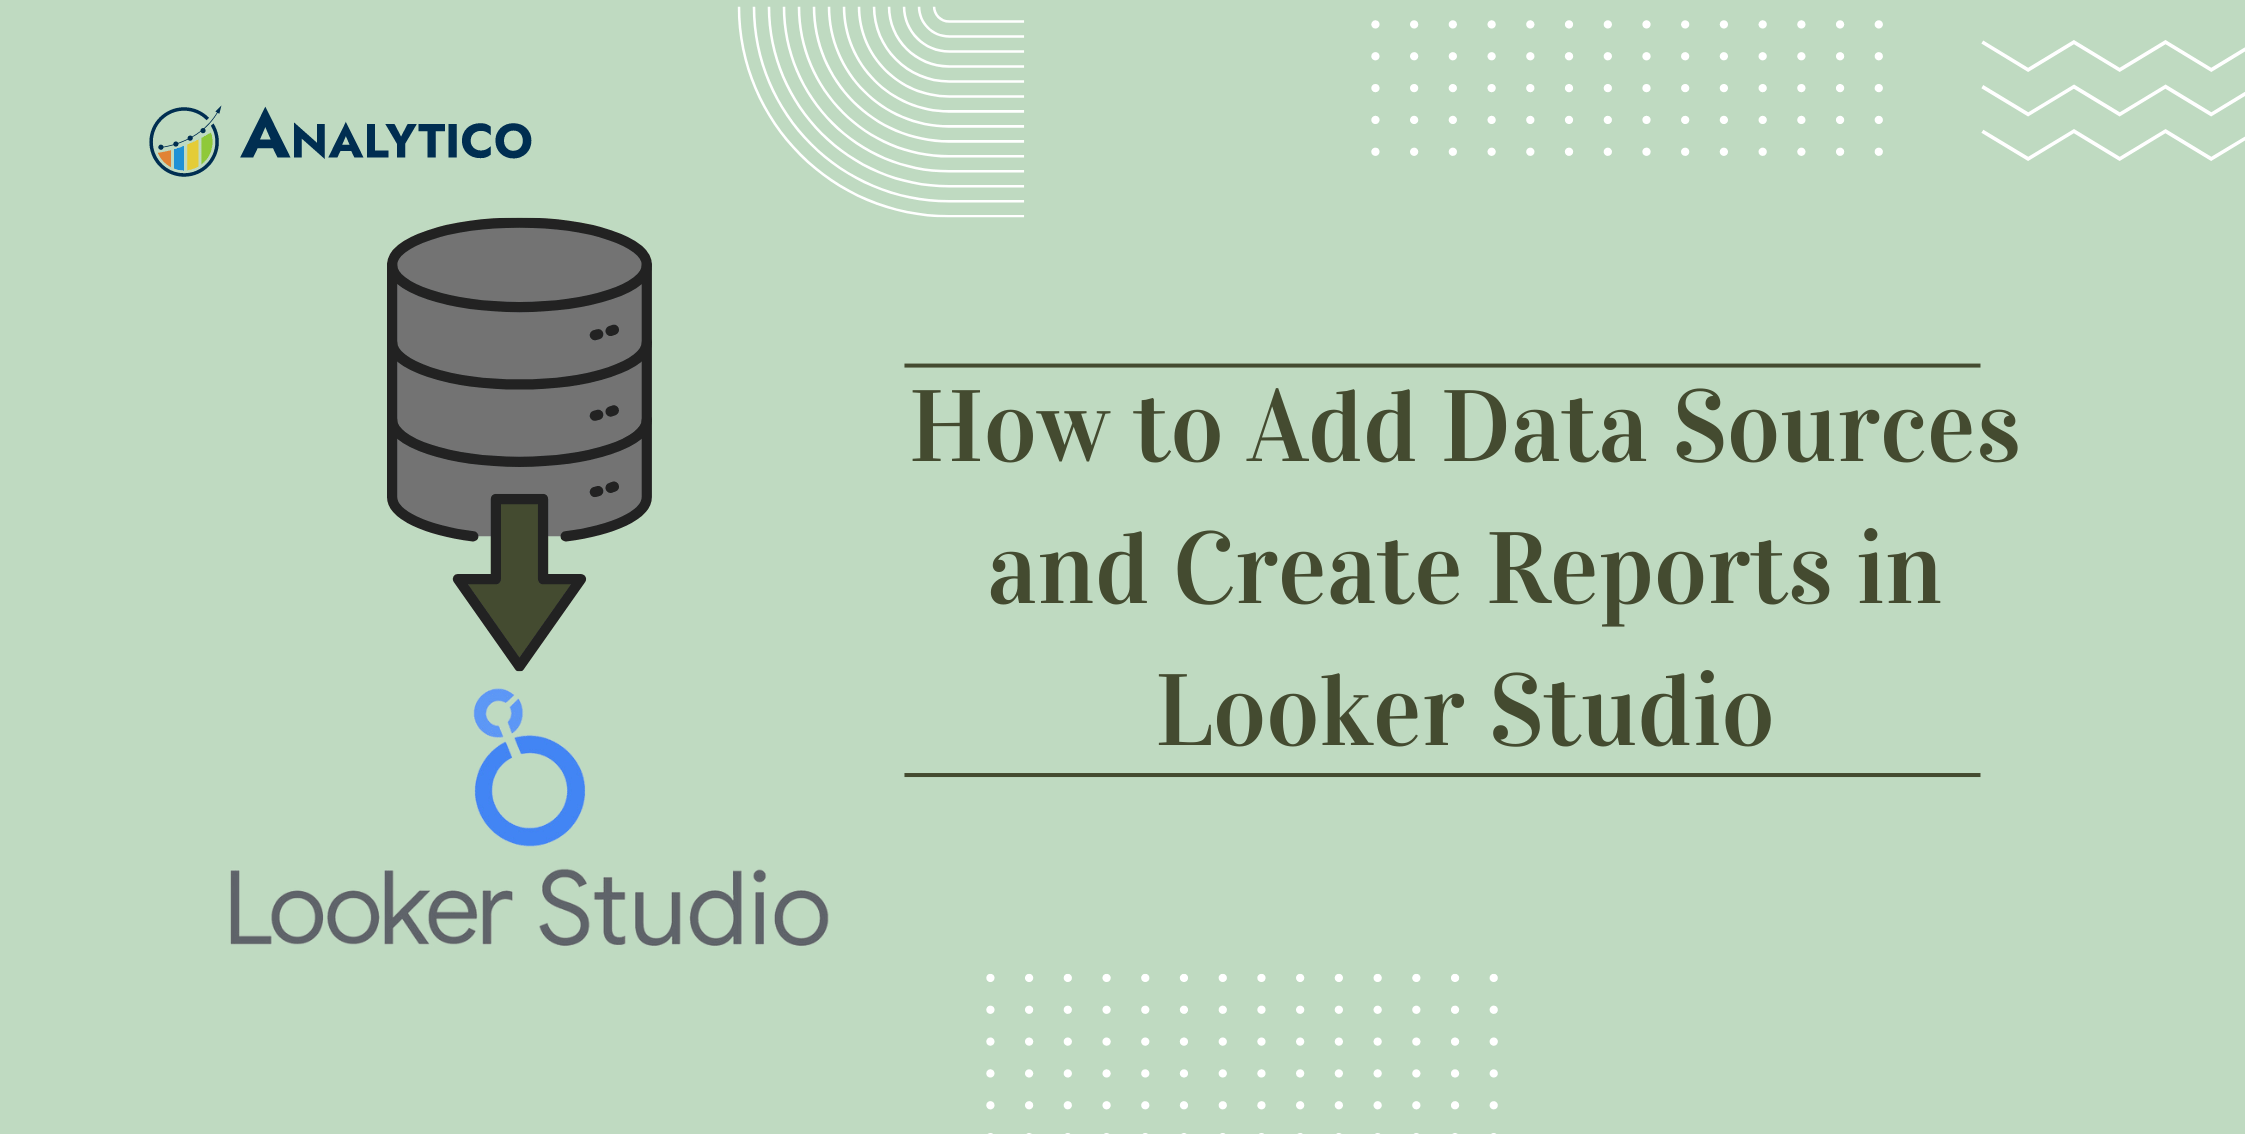 How to Add Data Sources and Create Reports in Looker Studio